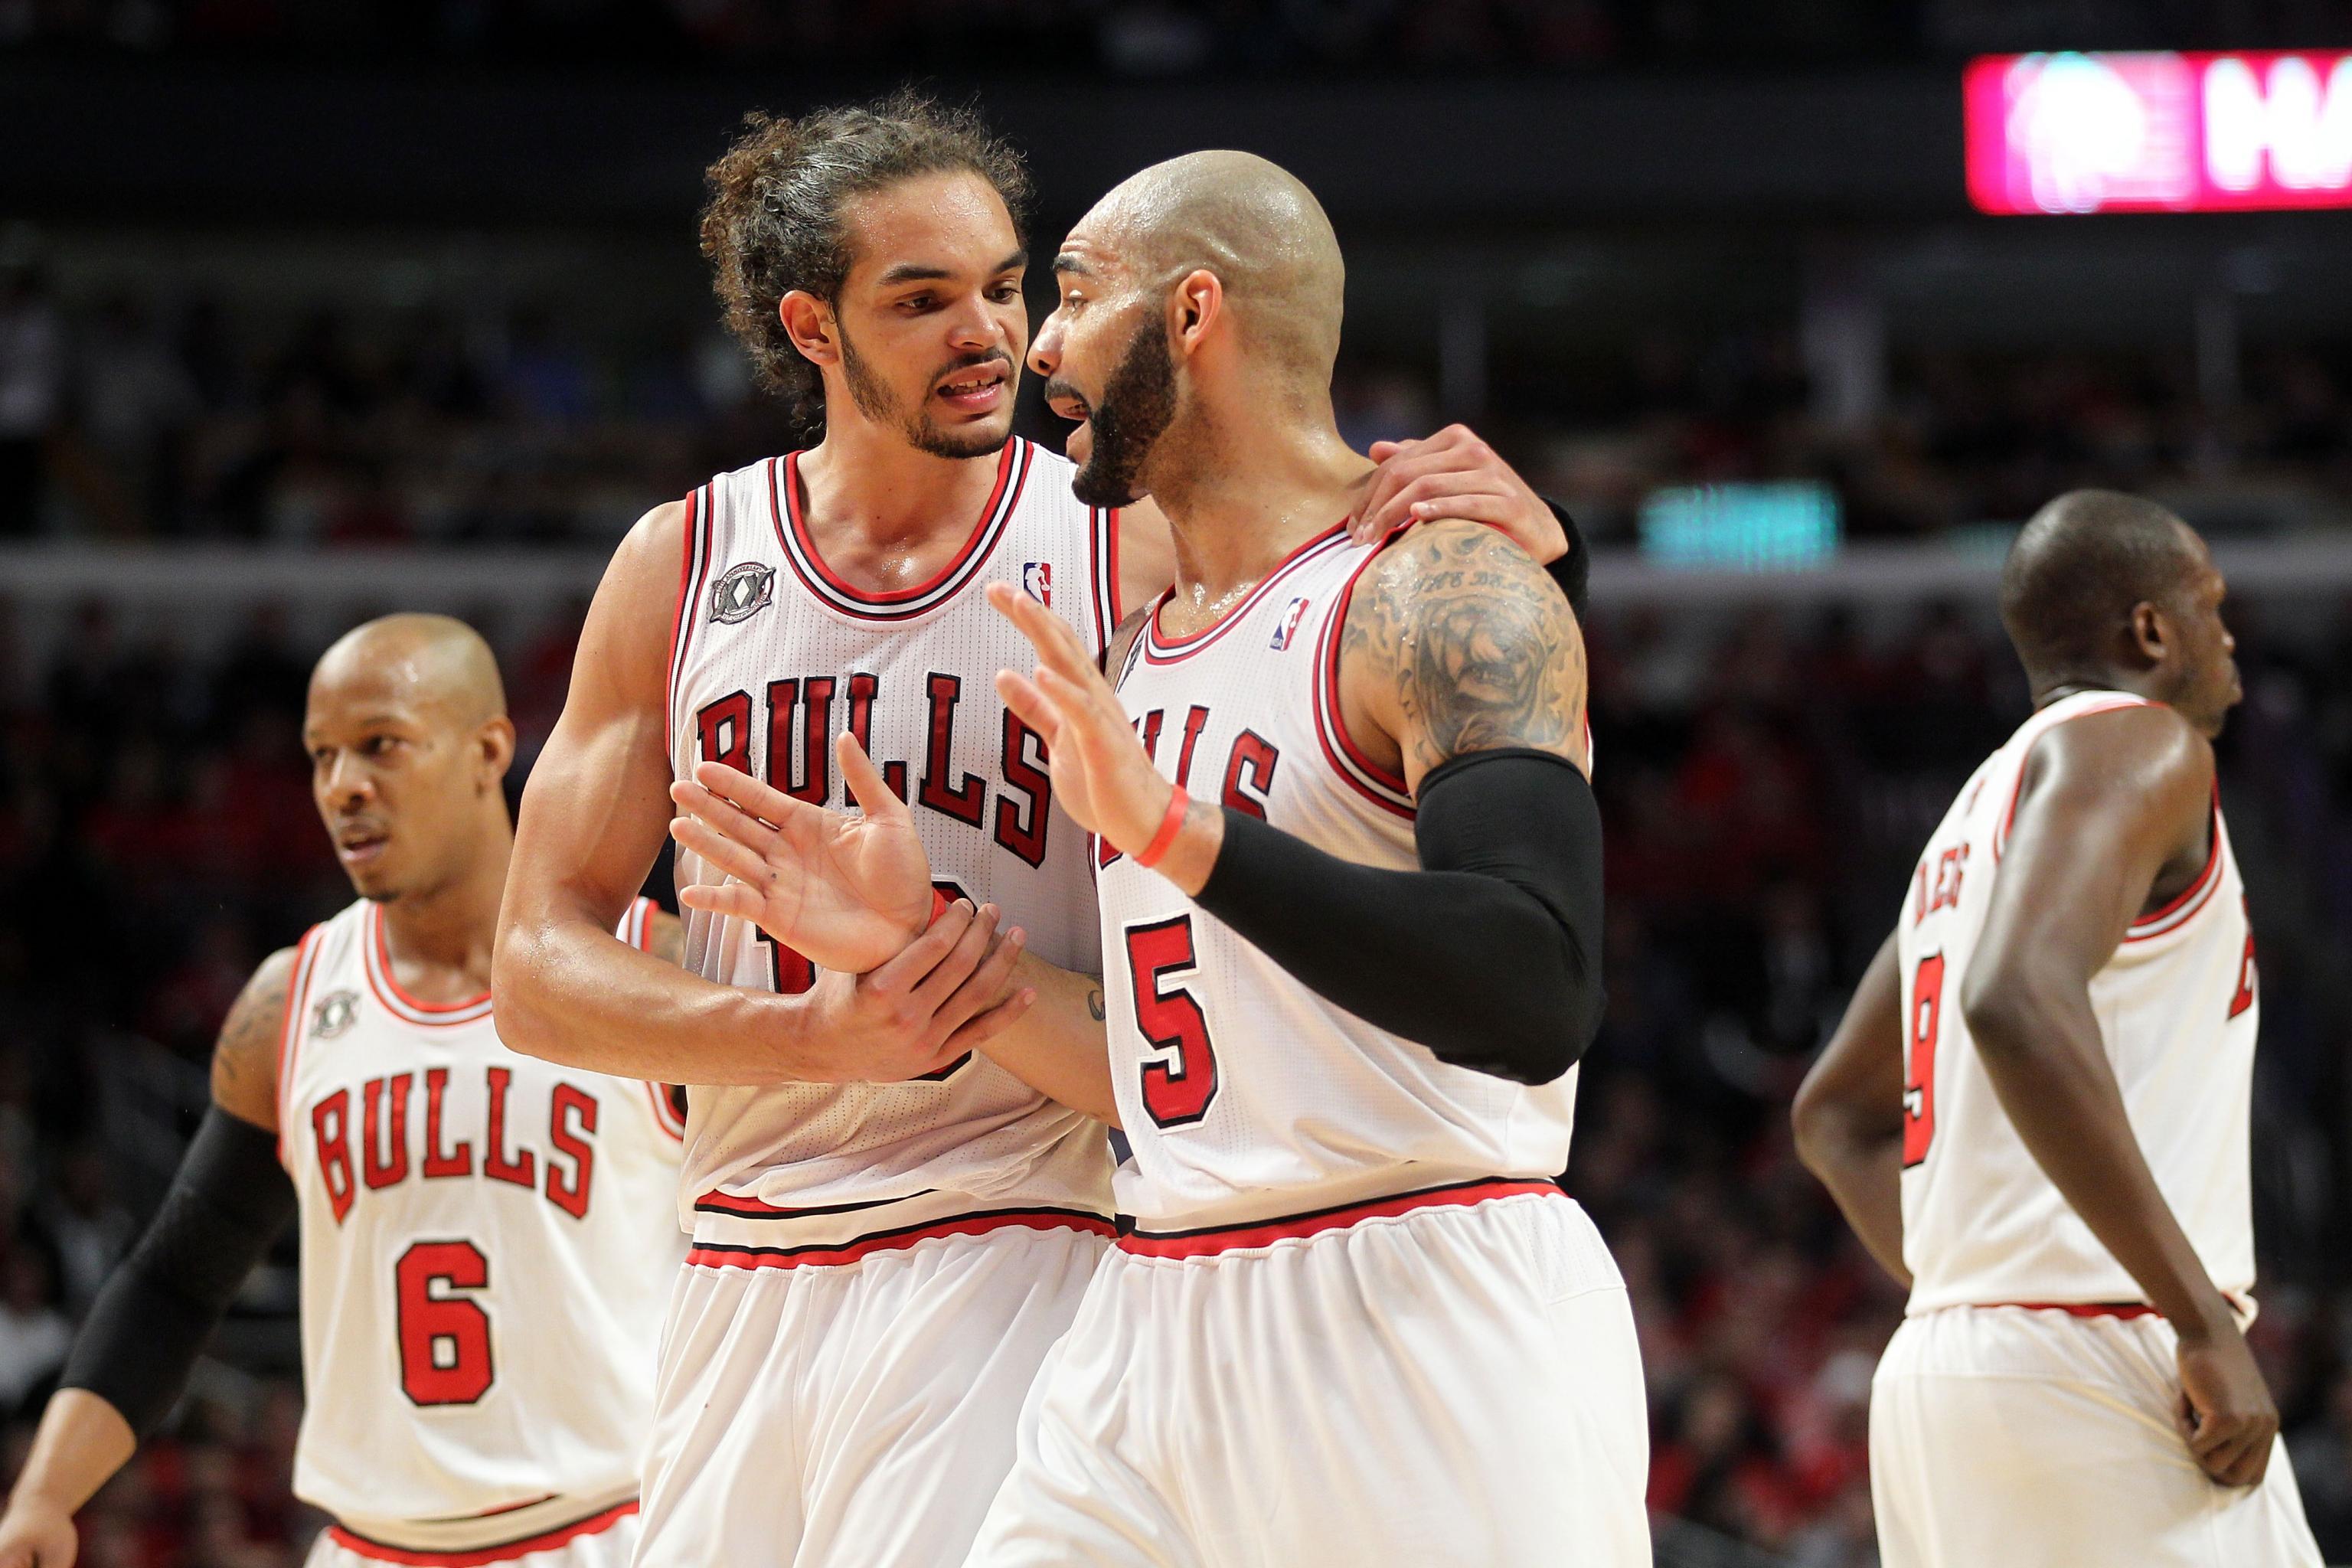 Bulls Advance as Boozer and Defense Have Big Night - The New York Times